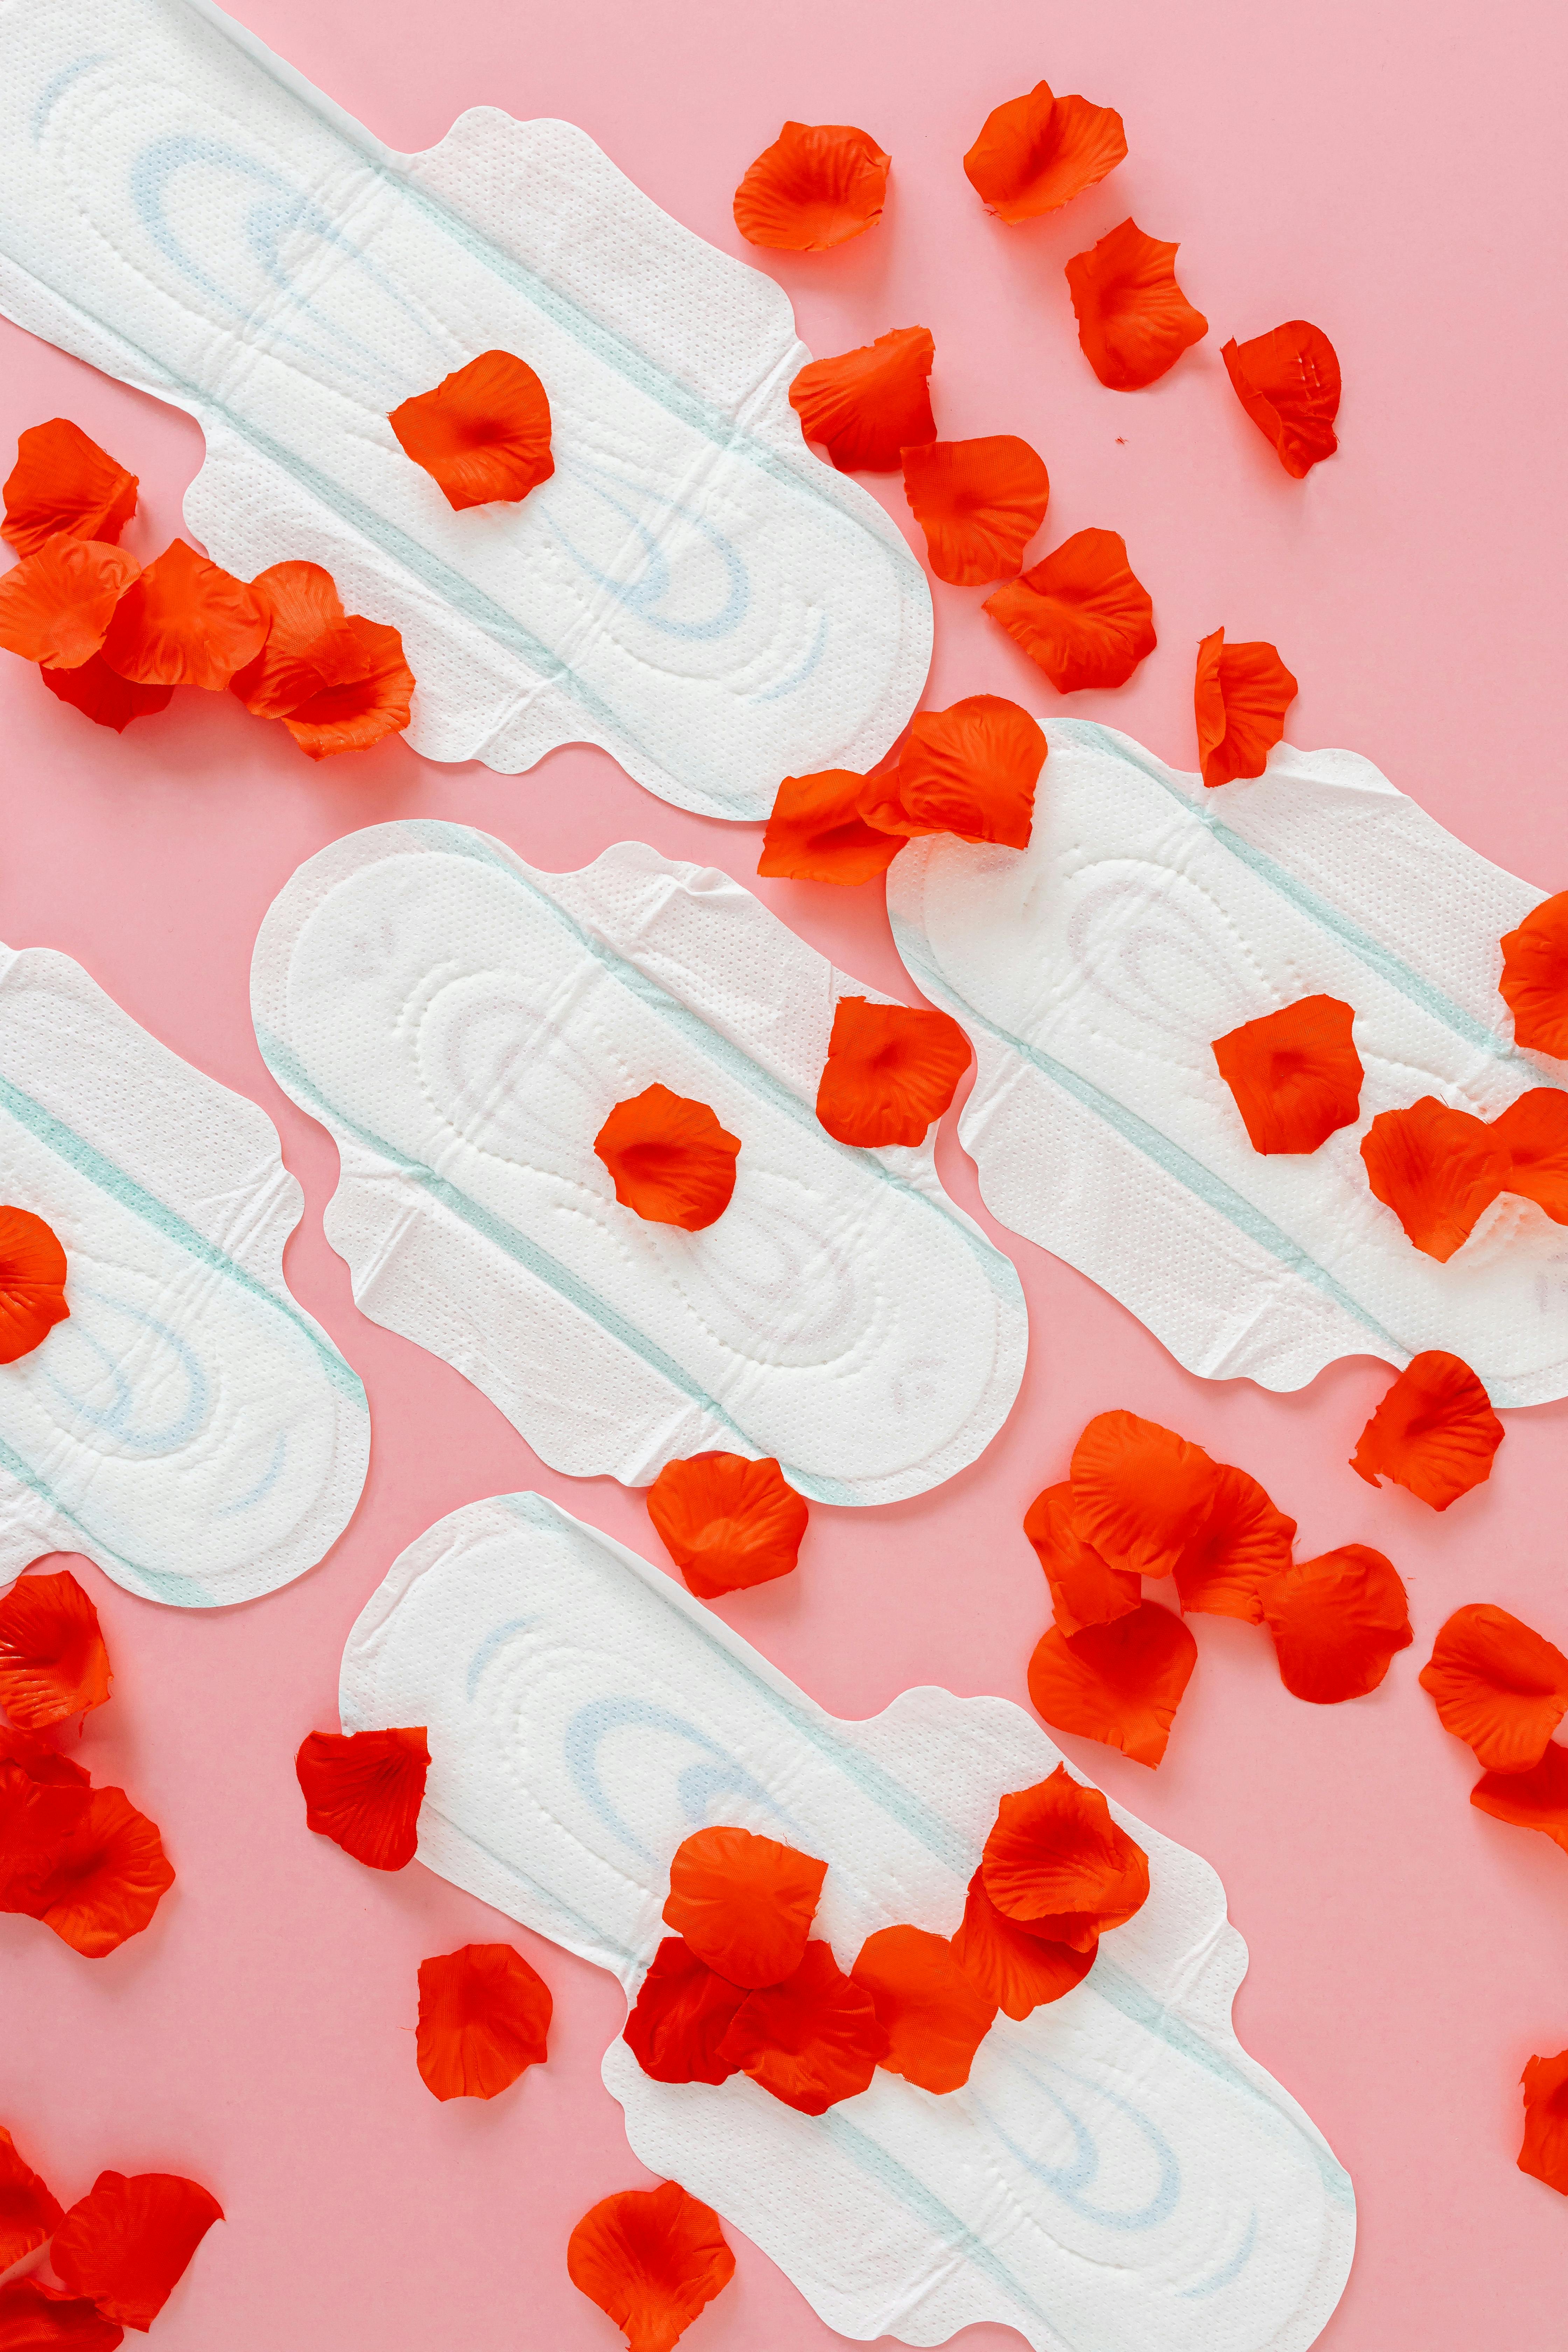 Close-up Shot of a Menstrual Pad with Blood · Free Stock Photo